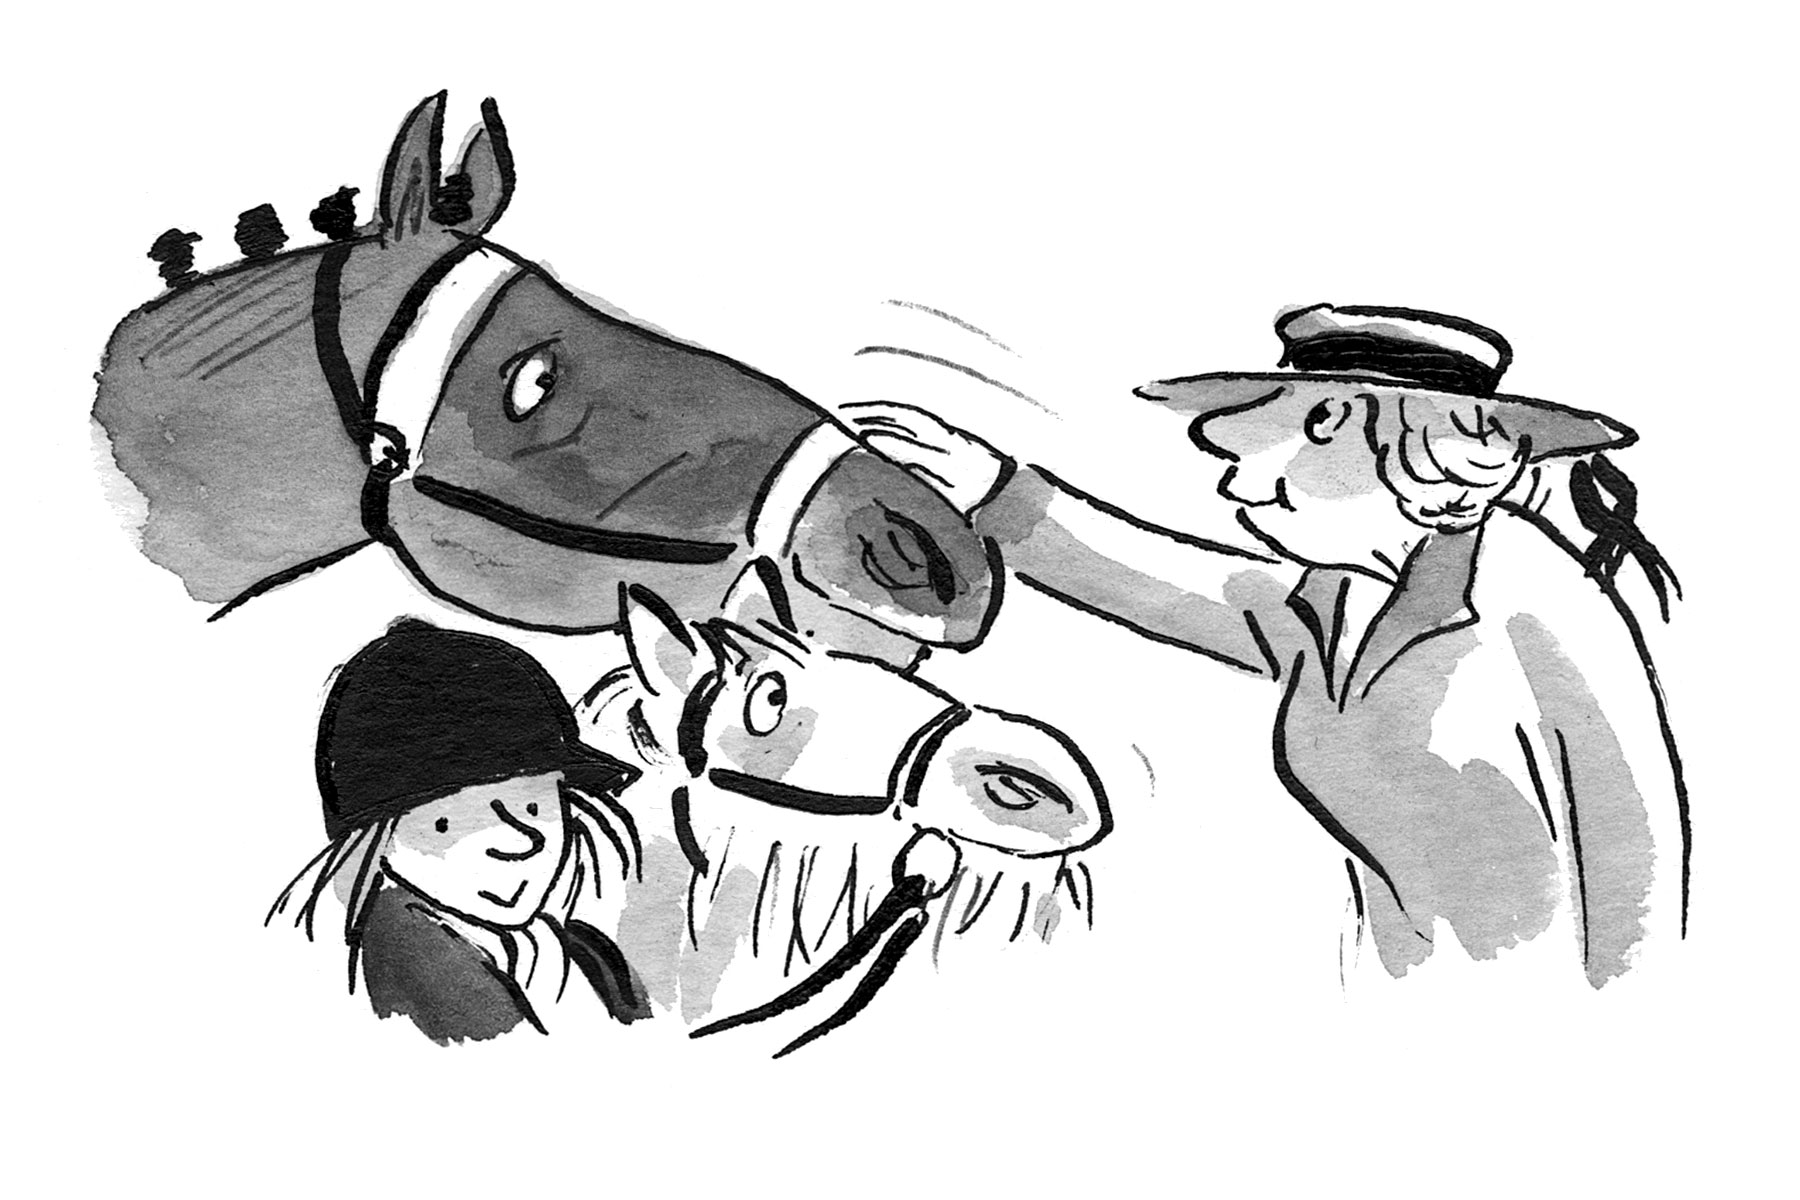 An illustration from The Horse Who Wouldn't Gallop by Clare Balding showing two horses being stroked by an older lady